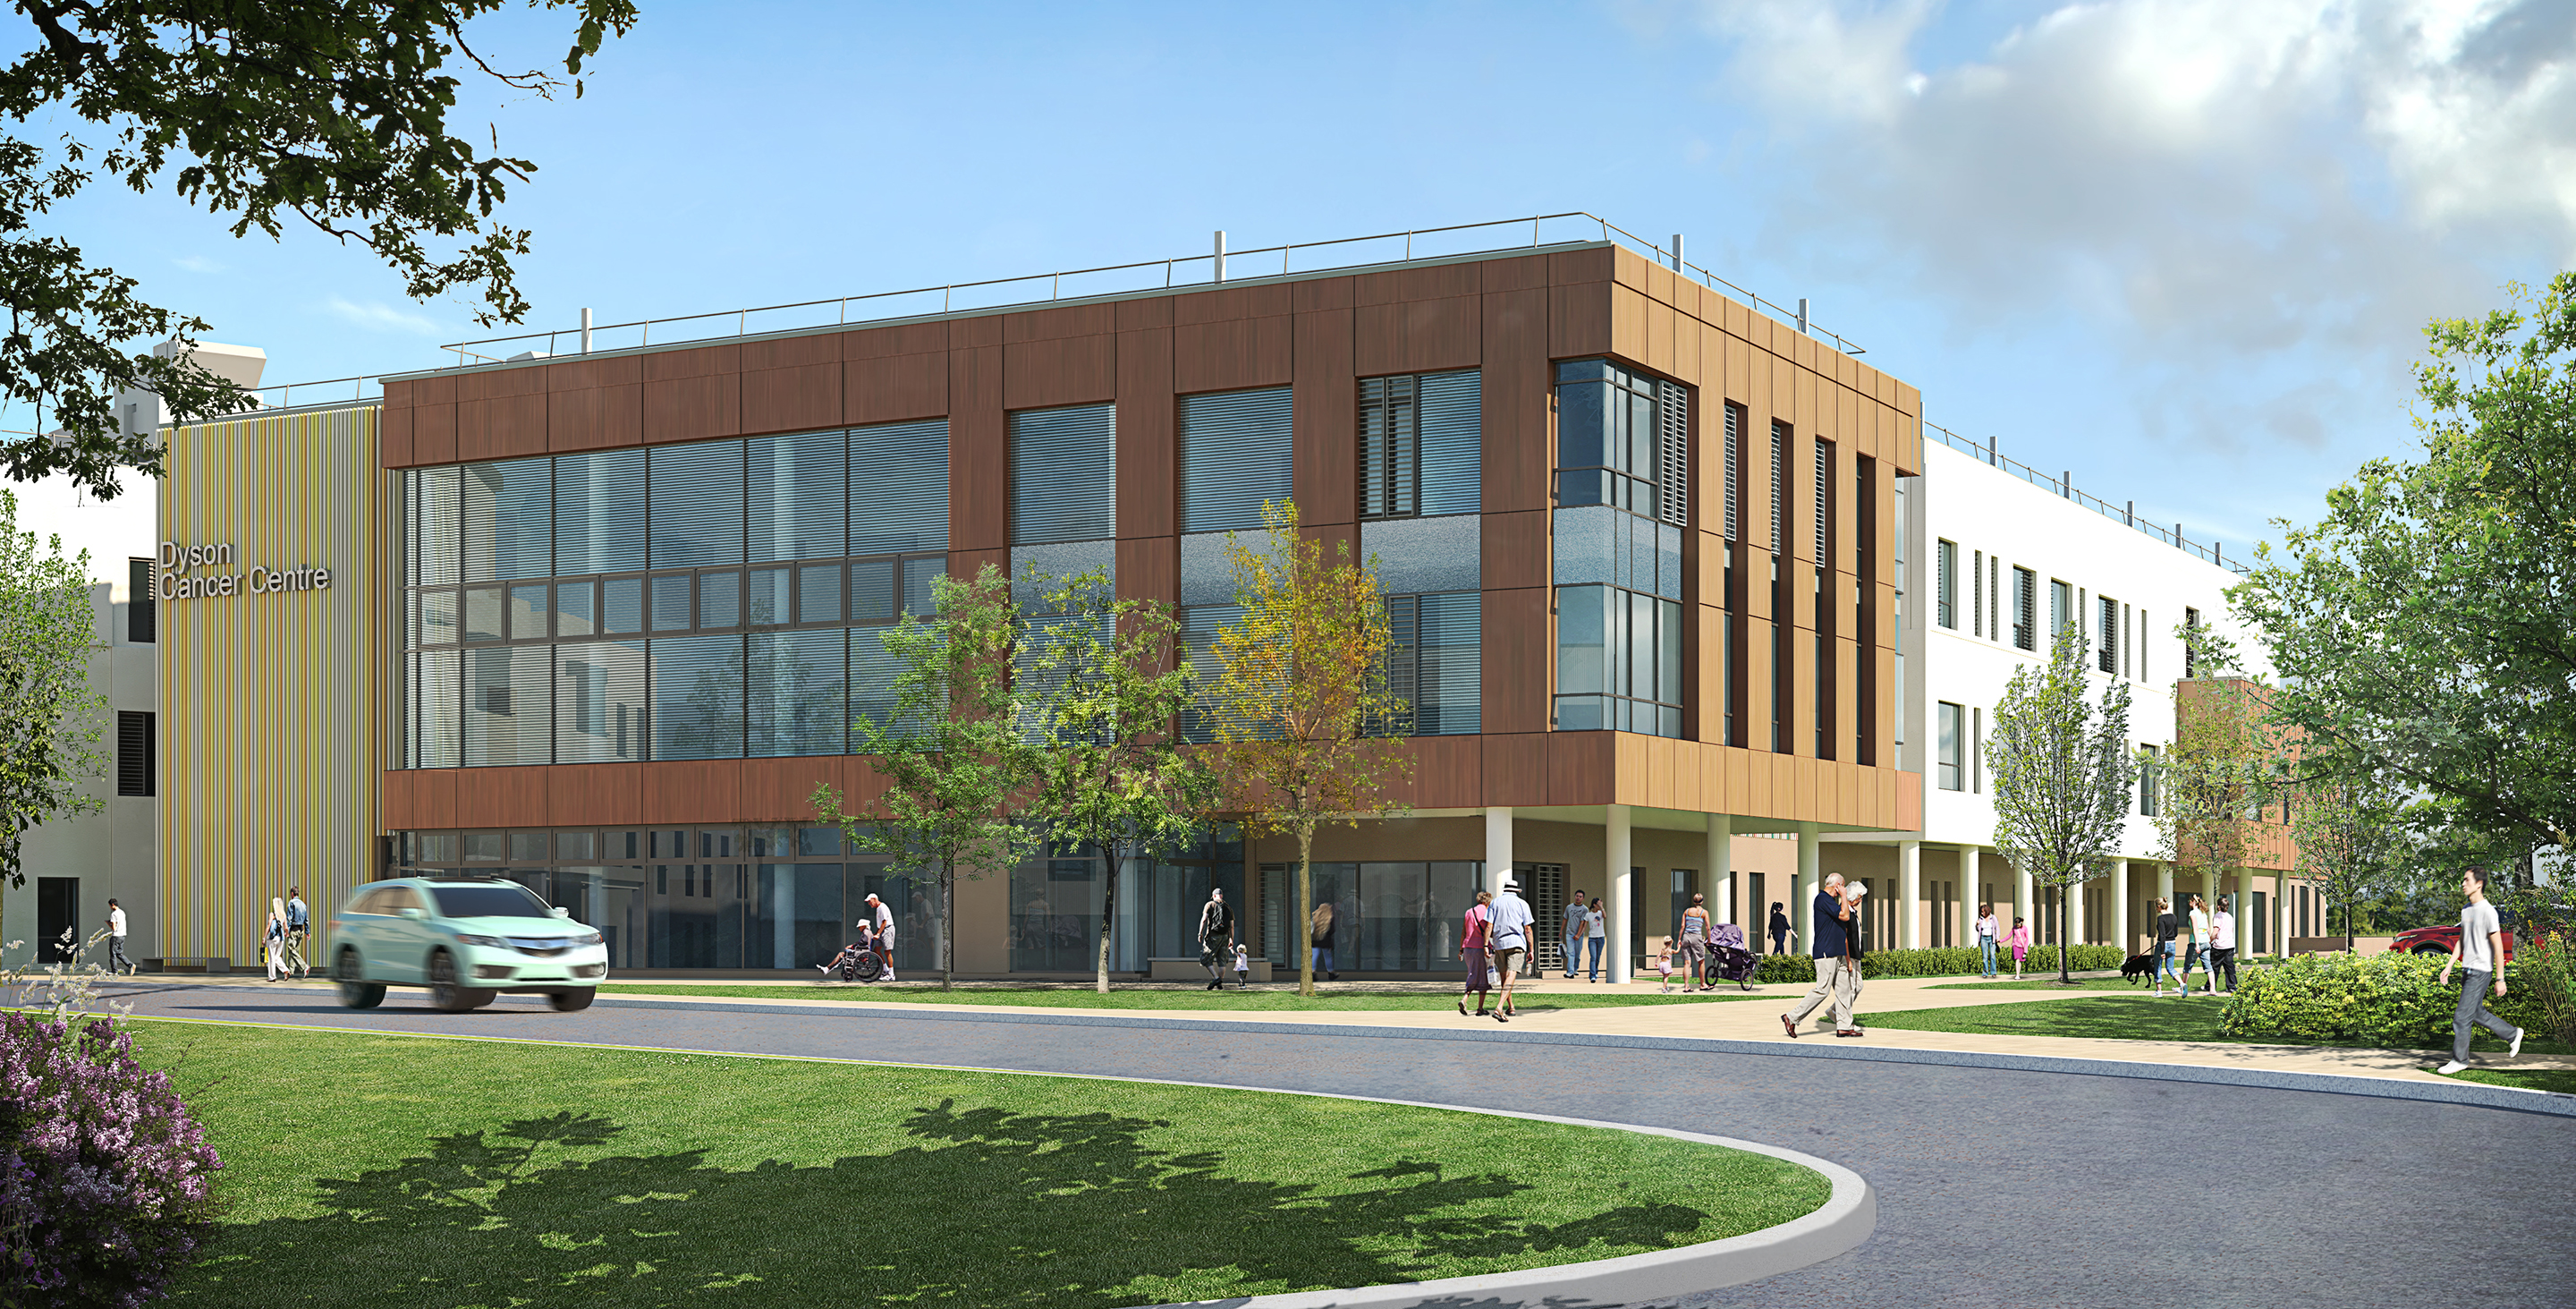 A render image of the planned Dyson Cancer Centre at the Royal United Hospital in Bath.